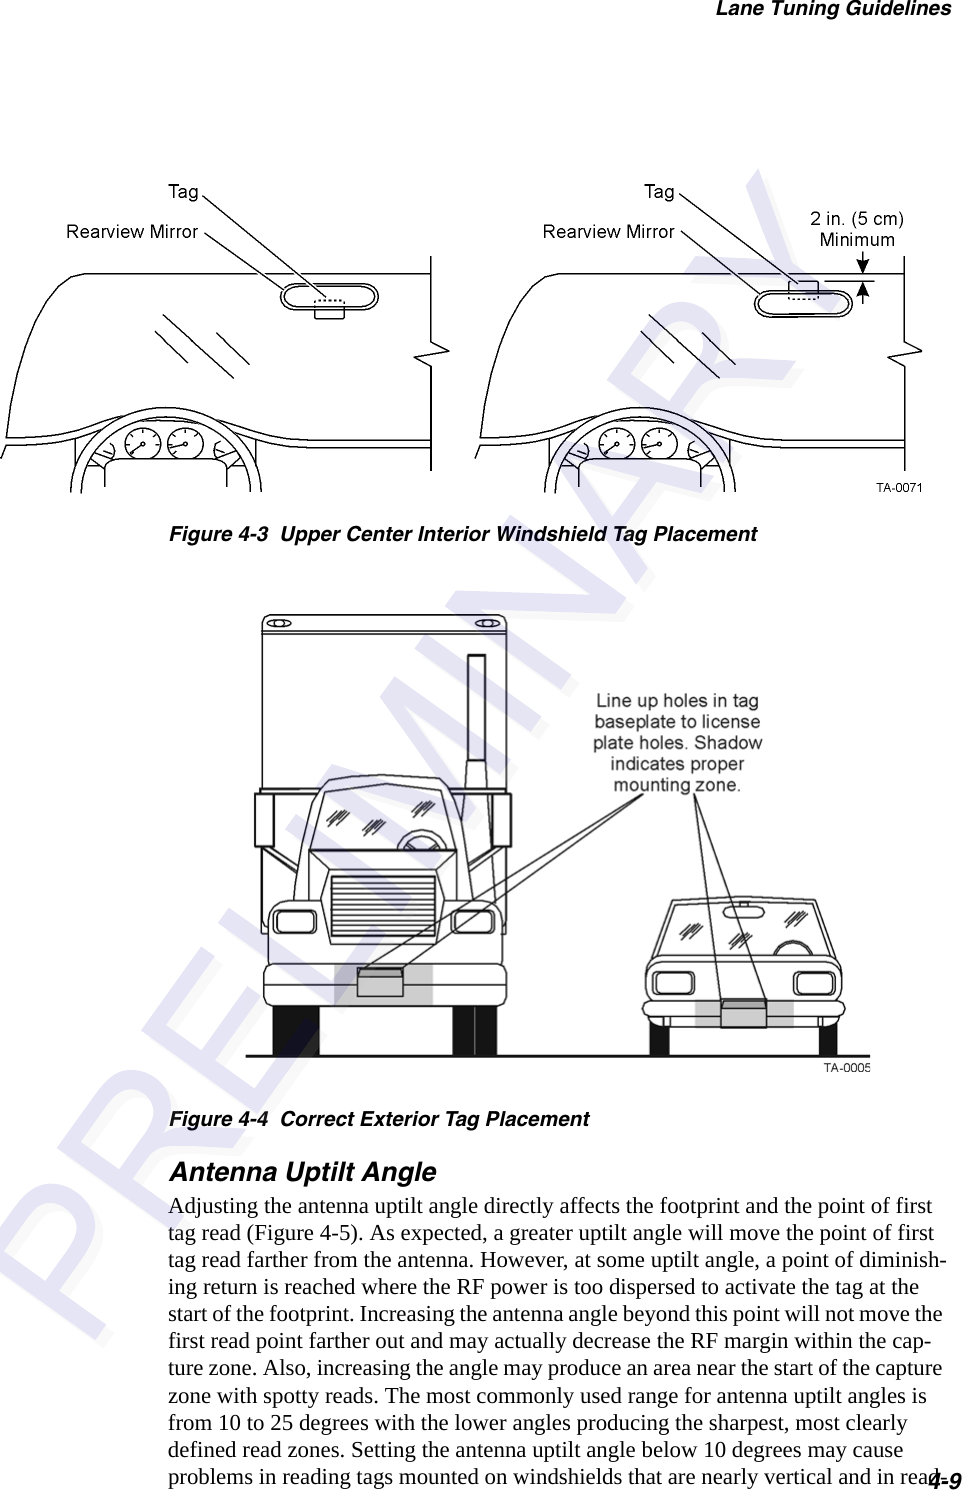 Lane Tuning Guidelines4-9Figure 4-3  Upper Center Interior Windshield Tag PlacementFigure 4-4  Correct Exterior Tag PlacementAntenna Uptilt AngleAdjusting the antenna uptilt angle directly affects the footprint and the point of first tag read (Figure 4-5). As expected, a greater uptilt angle will move the point of first tag read farther from the antenna. However, at some uptilt angle, a point of diminish-ing return is reached where the RF power is too dispersed to activate the tag at the start of the footprint. Increasing the antenna angle beyond this point will not move the first read point farther out and may actually decrease the RF margin within the cap-ture zone. Also, increasing the angle may produce an area near the start of the capture zone with spotty reads. The most commonly used range for antenna uptilt angles is from 10 to 25 degrees with the lower angles producing the sharpest, most clearly defined read zones. Setting the antenna uptilt angle below 10 degrees may cause problems in reading tags mounted on windshields that are nearly vertical and in read-